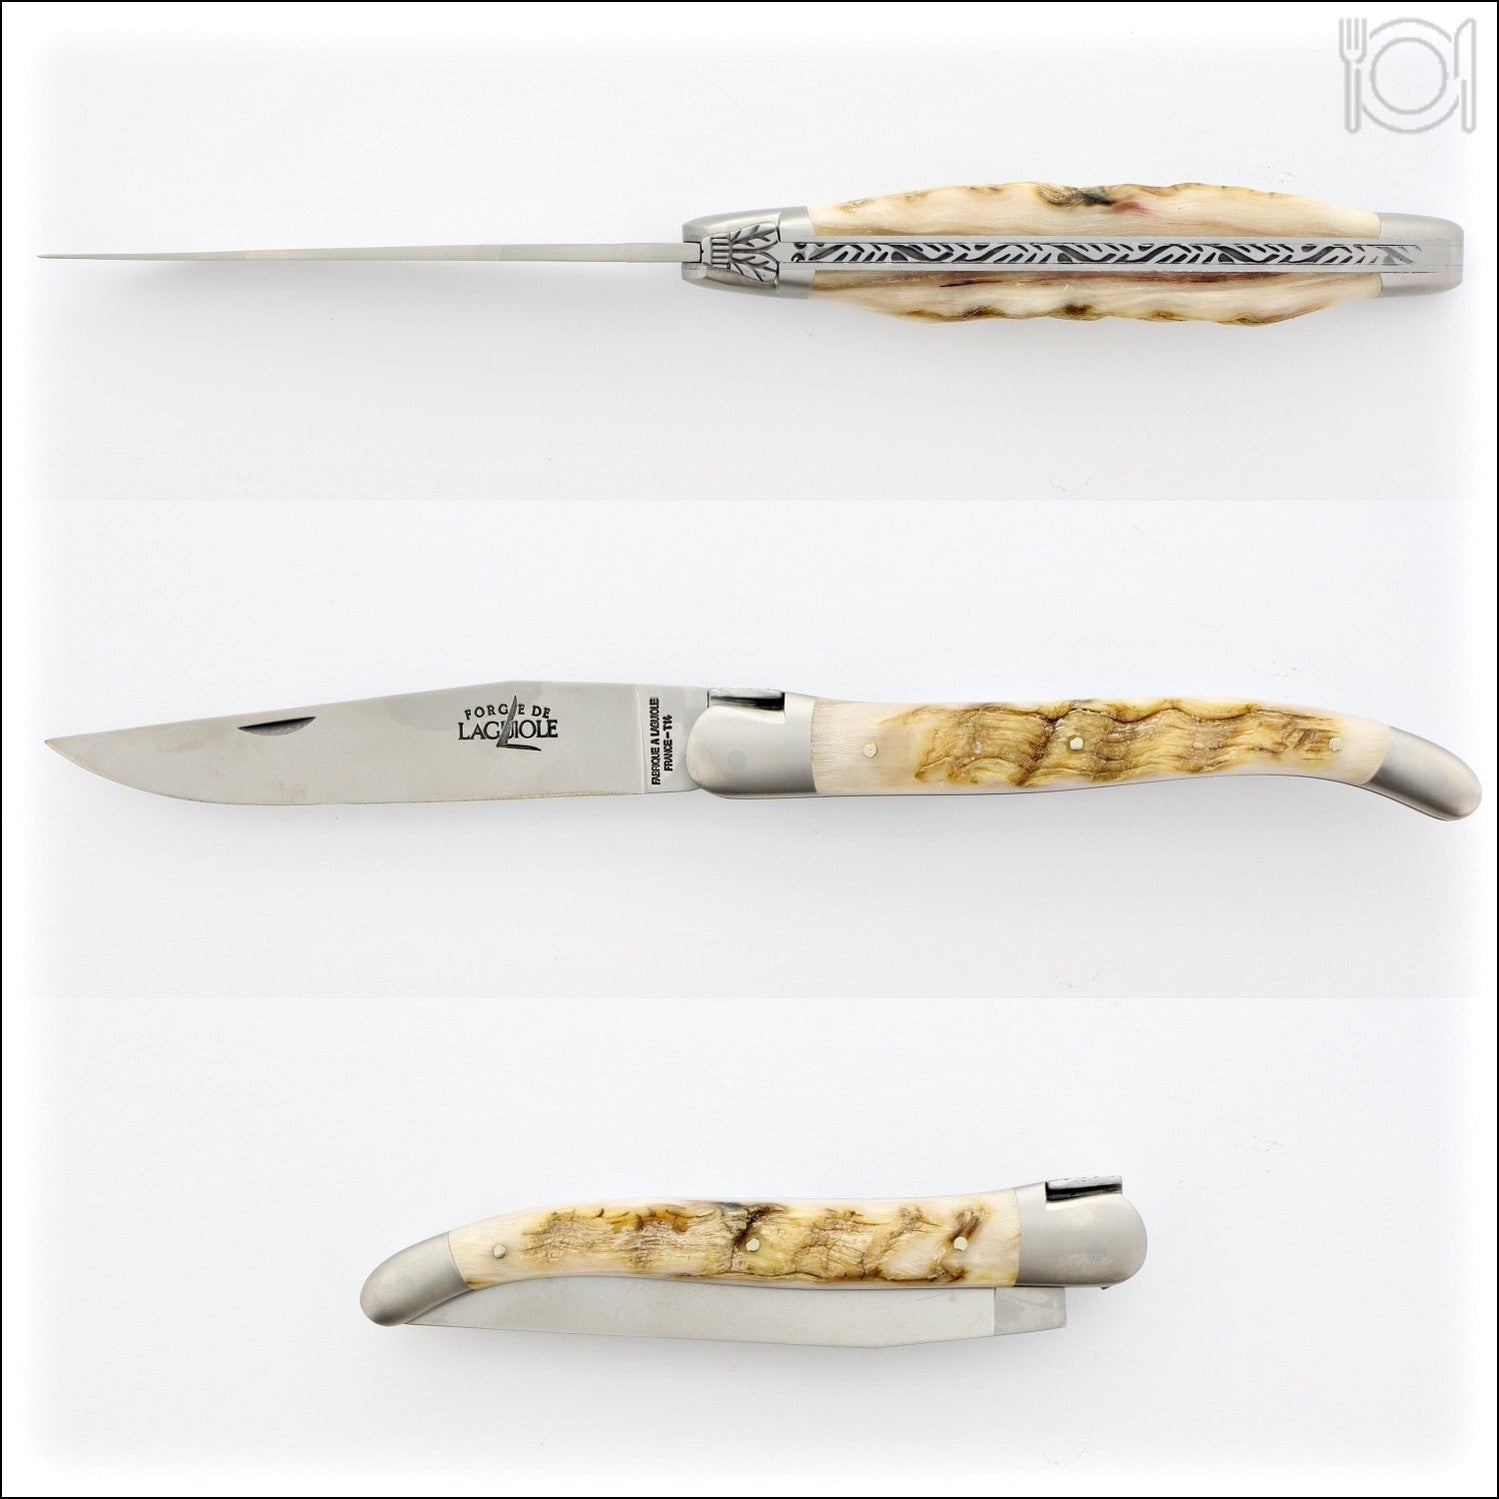 High quality, high discounts Forge de Laguiole Horn Tip Handle Steak Knives  - Laguiole Imports, steak knives with covers 